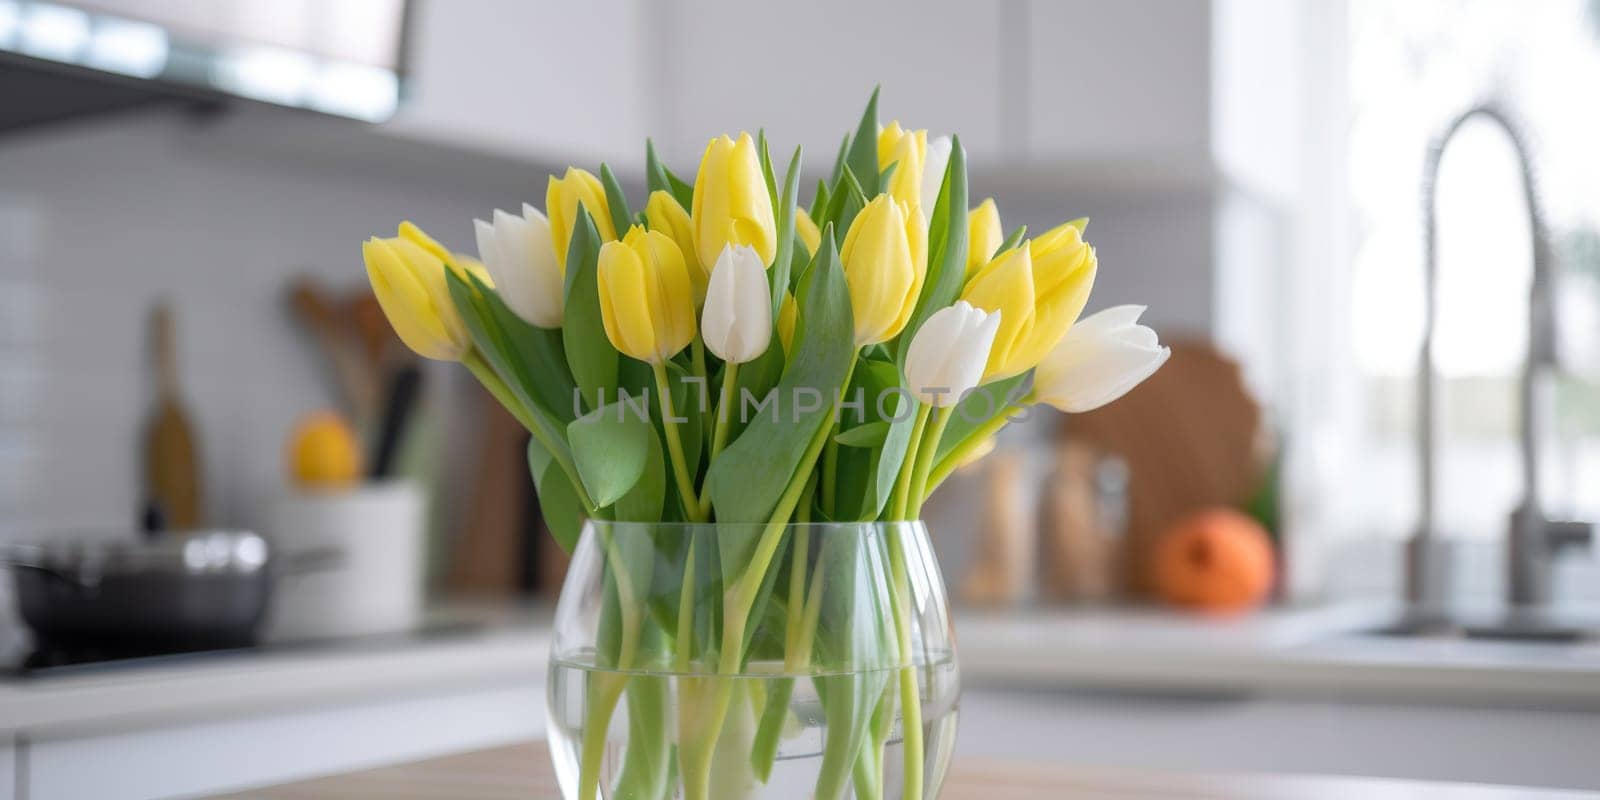 Beautiful Bouquet Of Fresh White And Yellow Tulips On A Kitchen Table by tan4ikk1